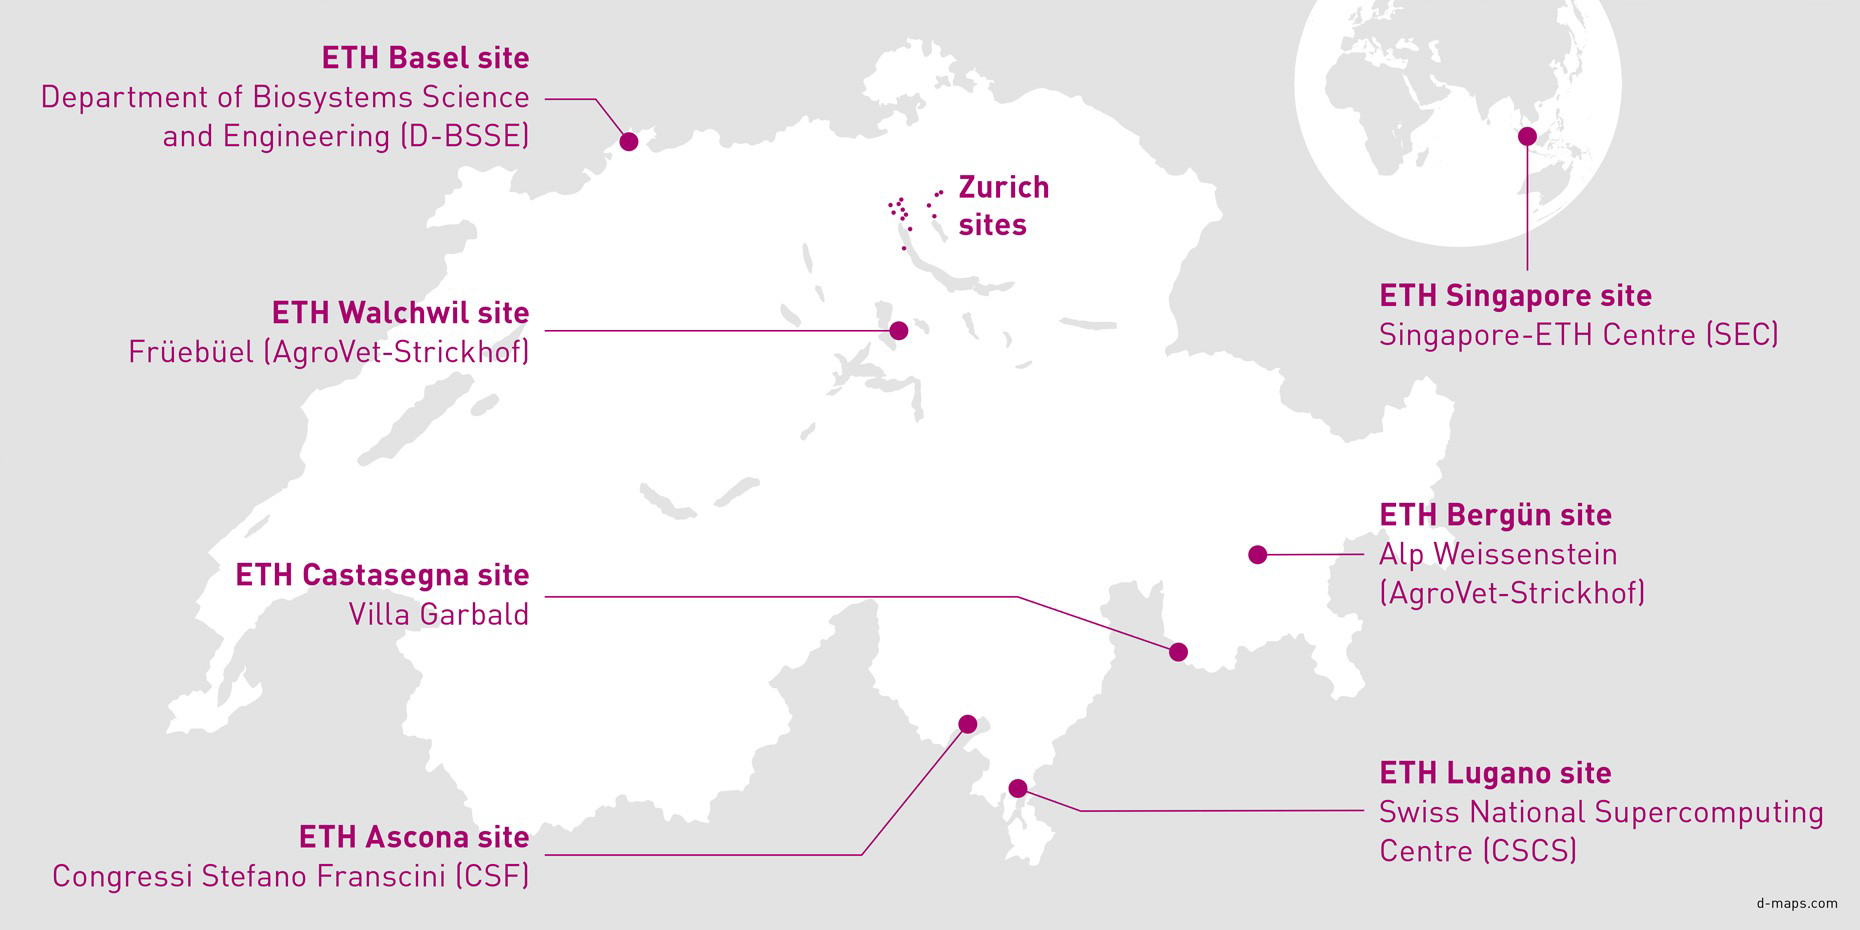 Enlarged view: Map with different ETH sites in Switzerland and Singapore